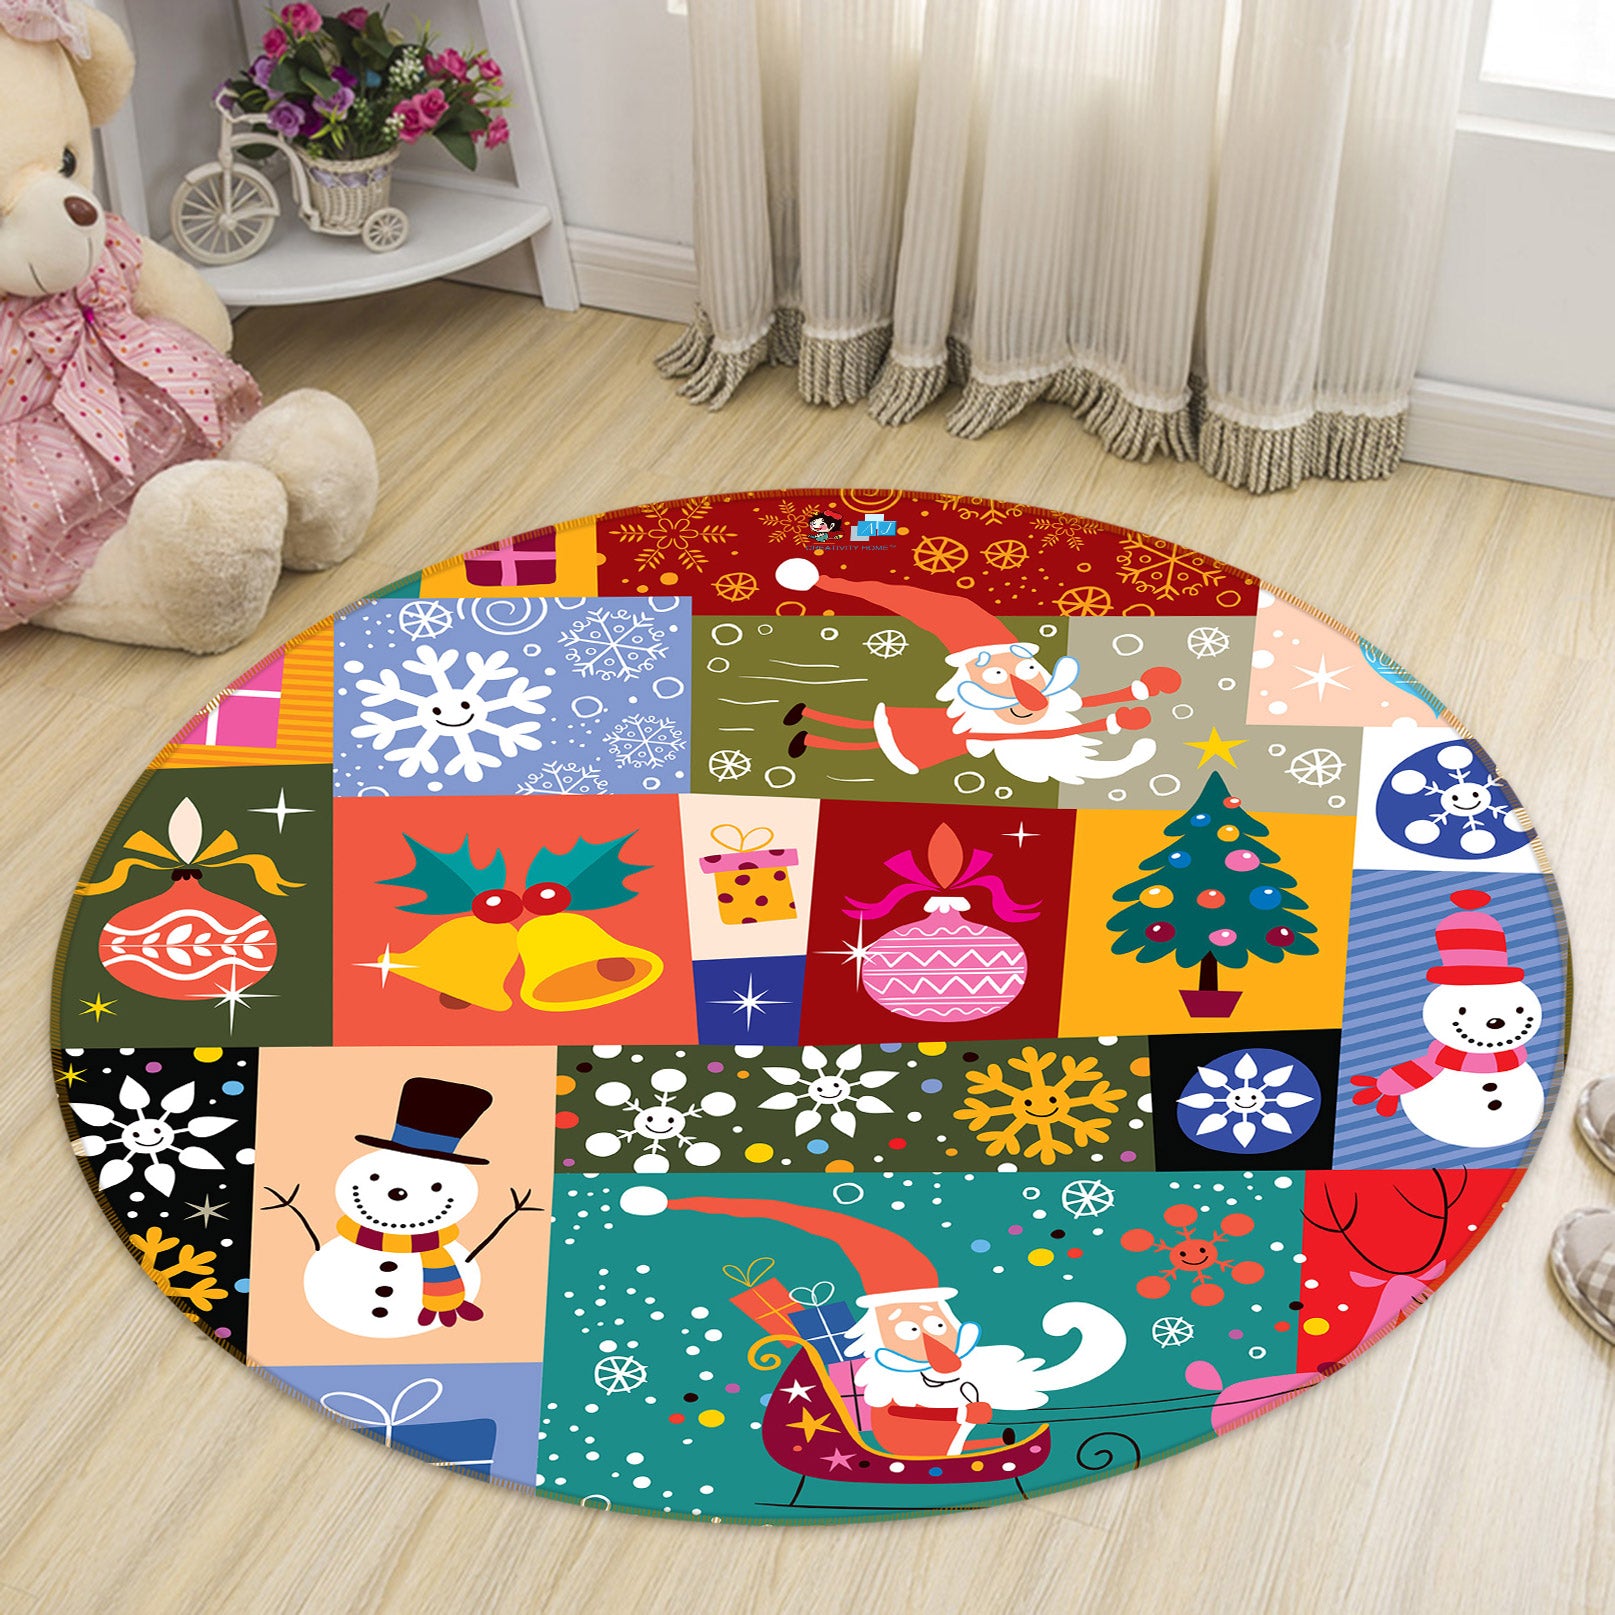 3D Colored Square Snowman 55165 Christmas Round Non Slip Rug Mat Xmas